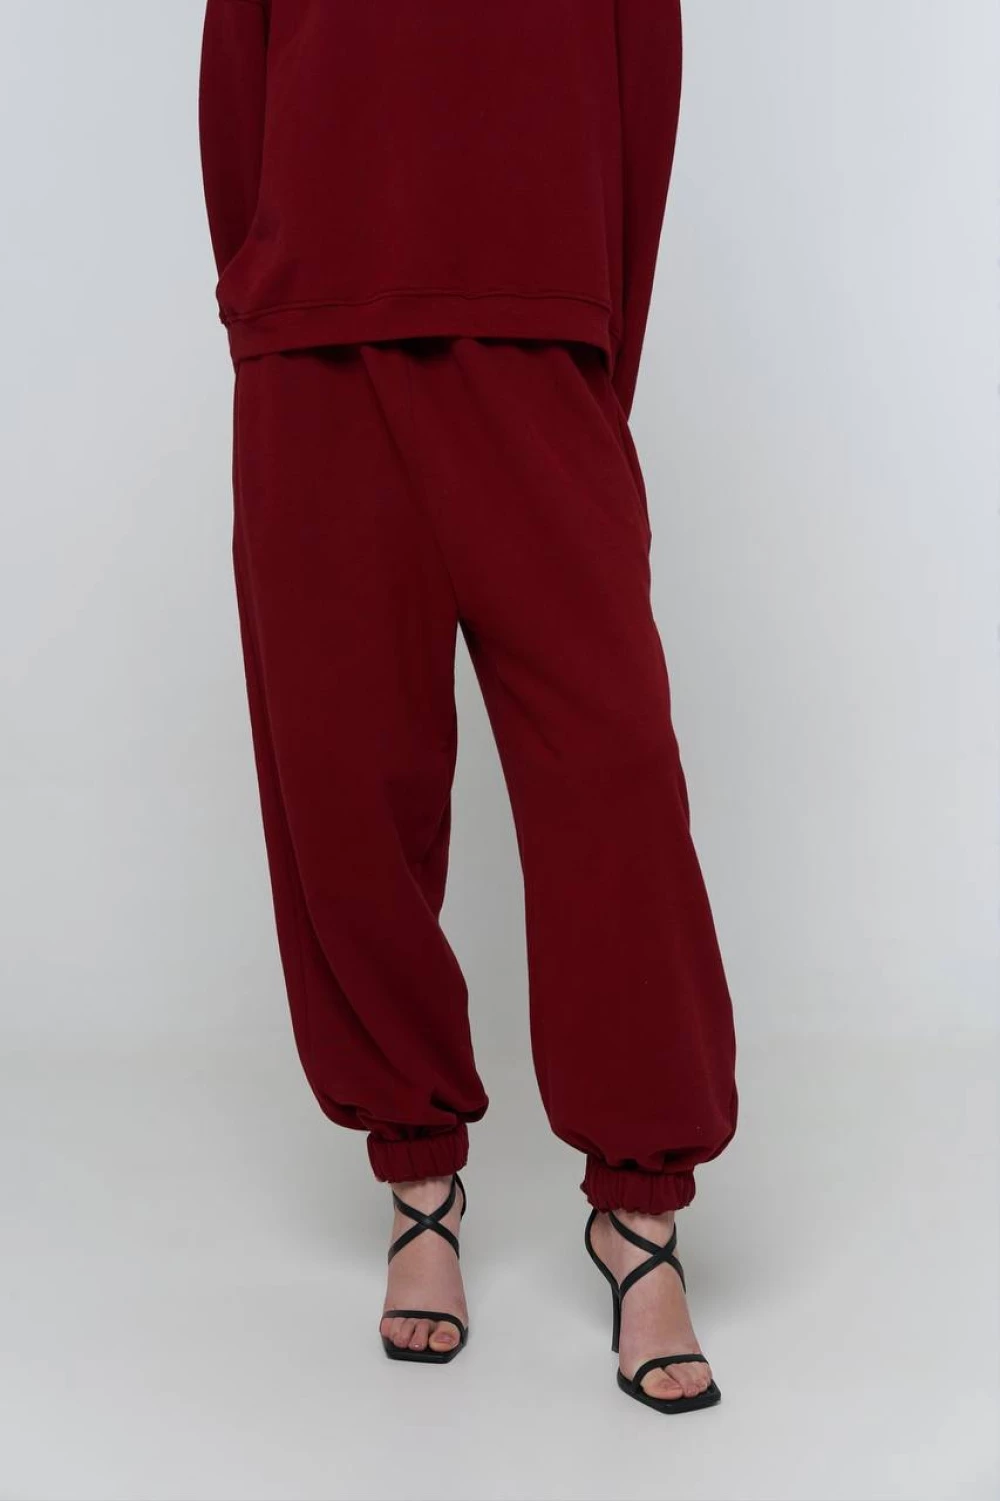 pants "groove" in strong red color